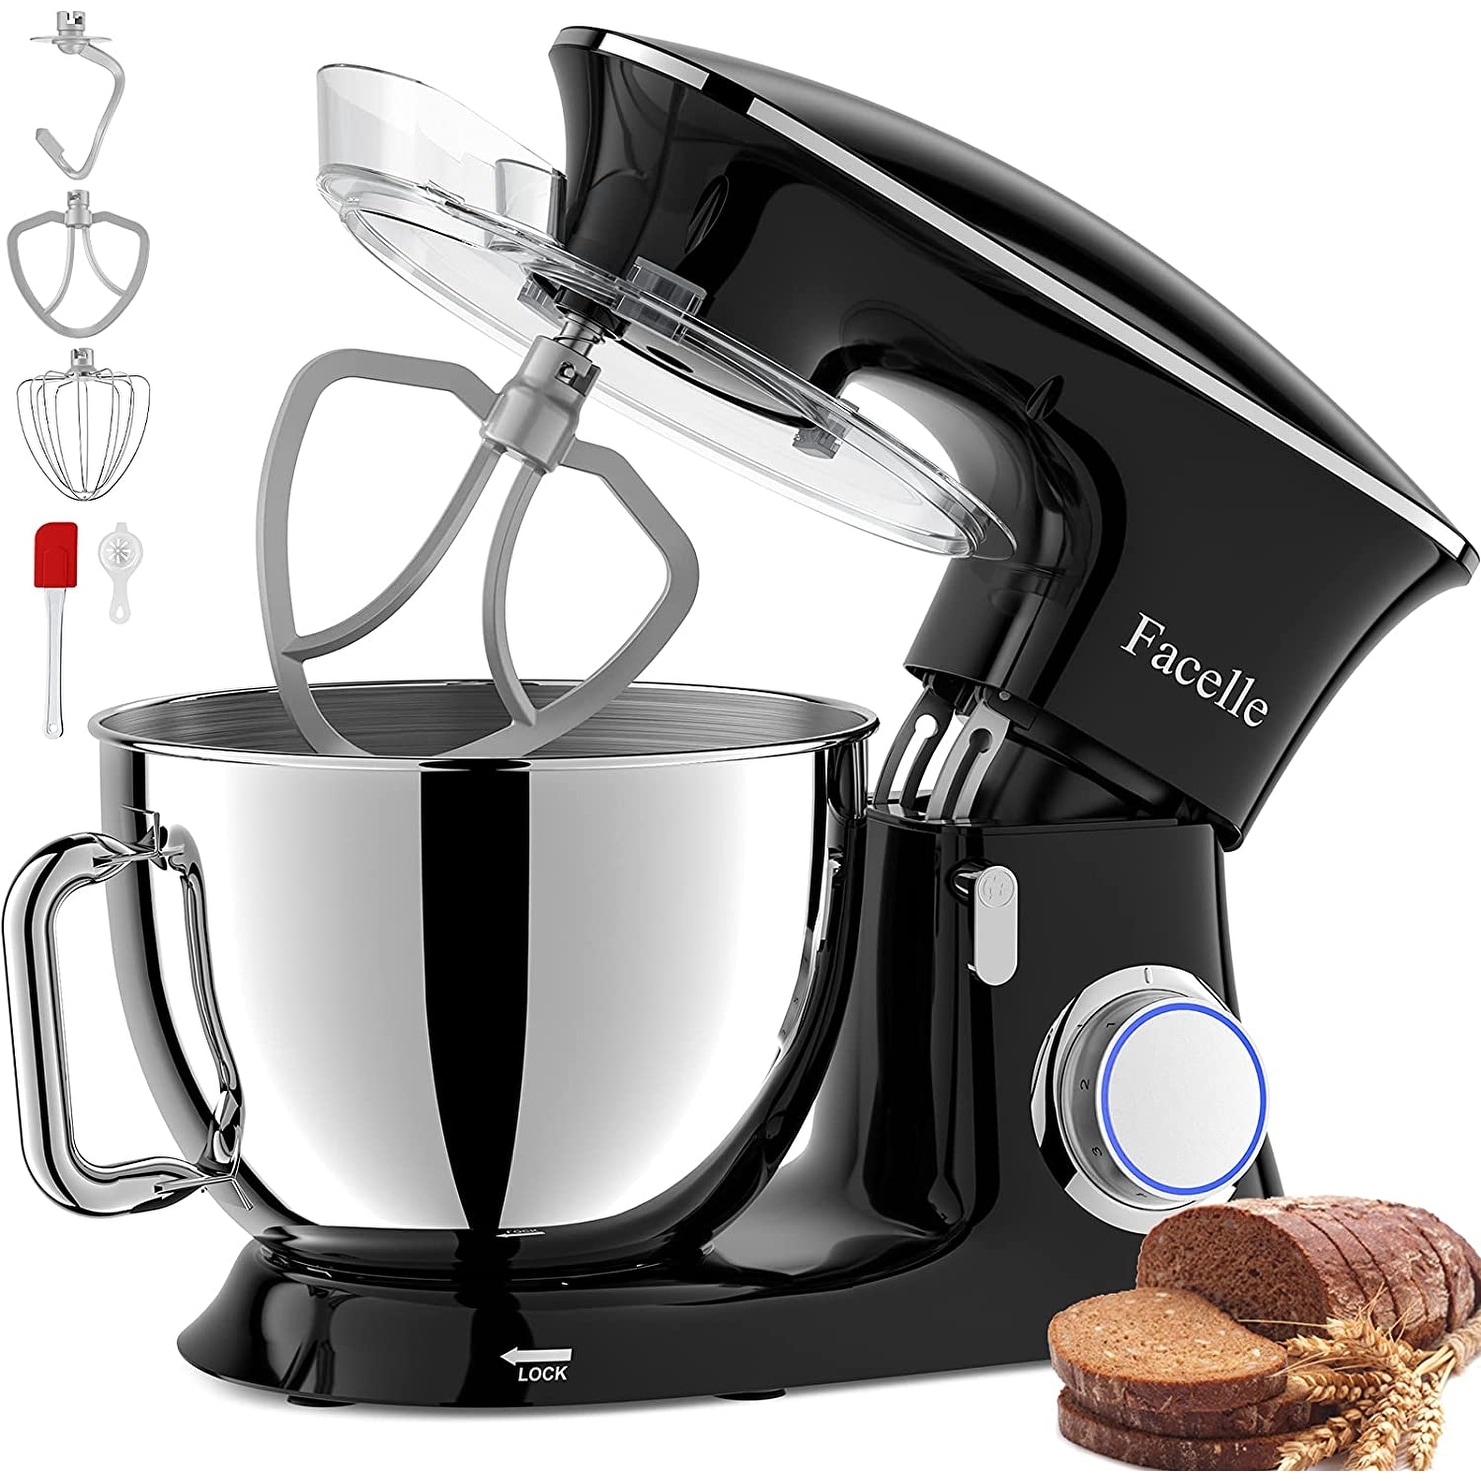 https://ak1.ostkcdn.com/images/products/is/images/direct/b007591b4bfac29f02f7573d235205d77927fe02/Stand-Mixer%2C-8.5-Quart-Electric-Mixer%2C-660W-6-Speed-Tilt-Head-Kitchen-Electric-Food-Mixer-with-Beater.jpg